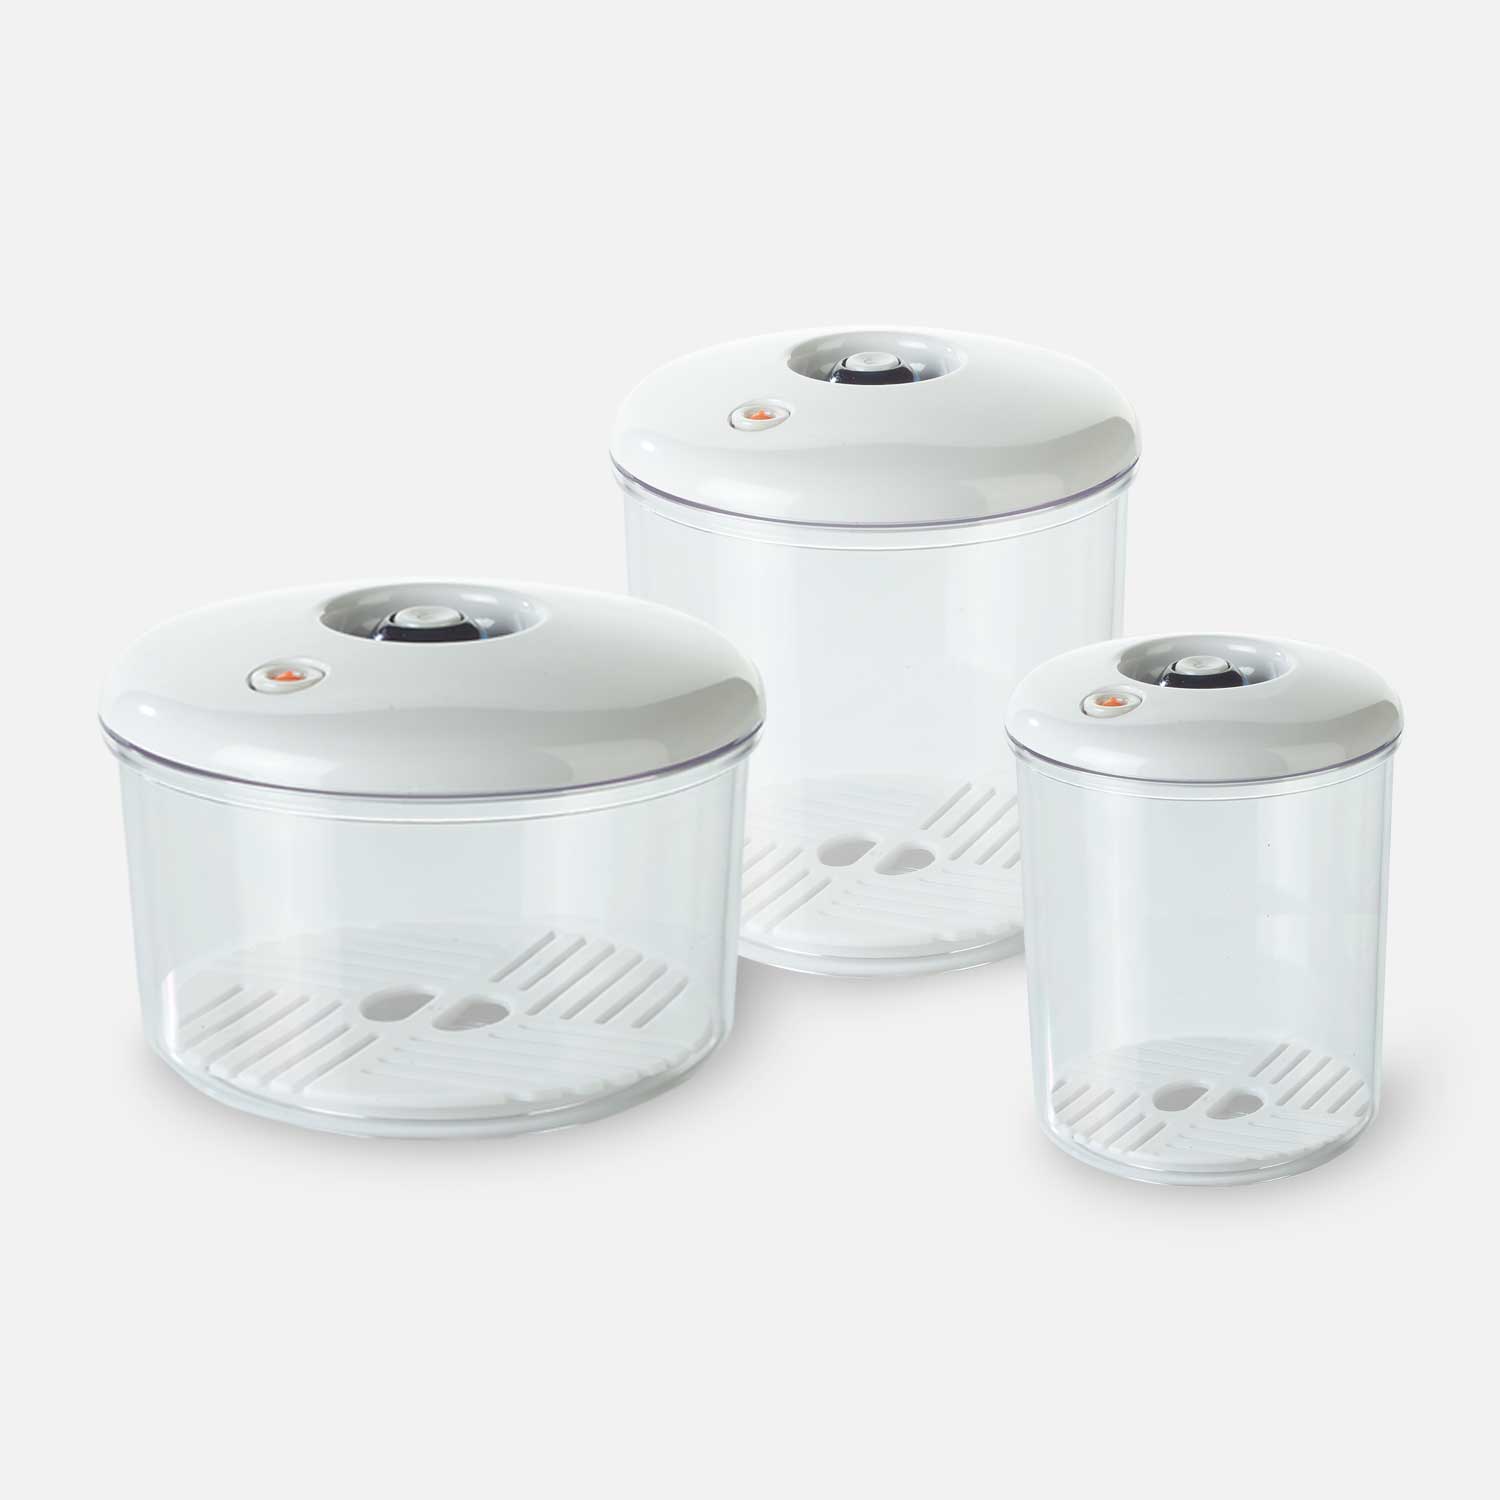 Round vacuum containers made of transparent plastic with a white lid - all available sizes